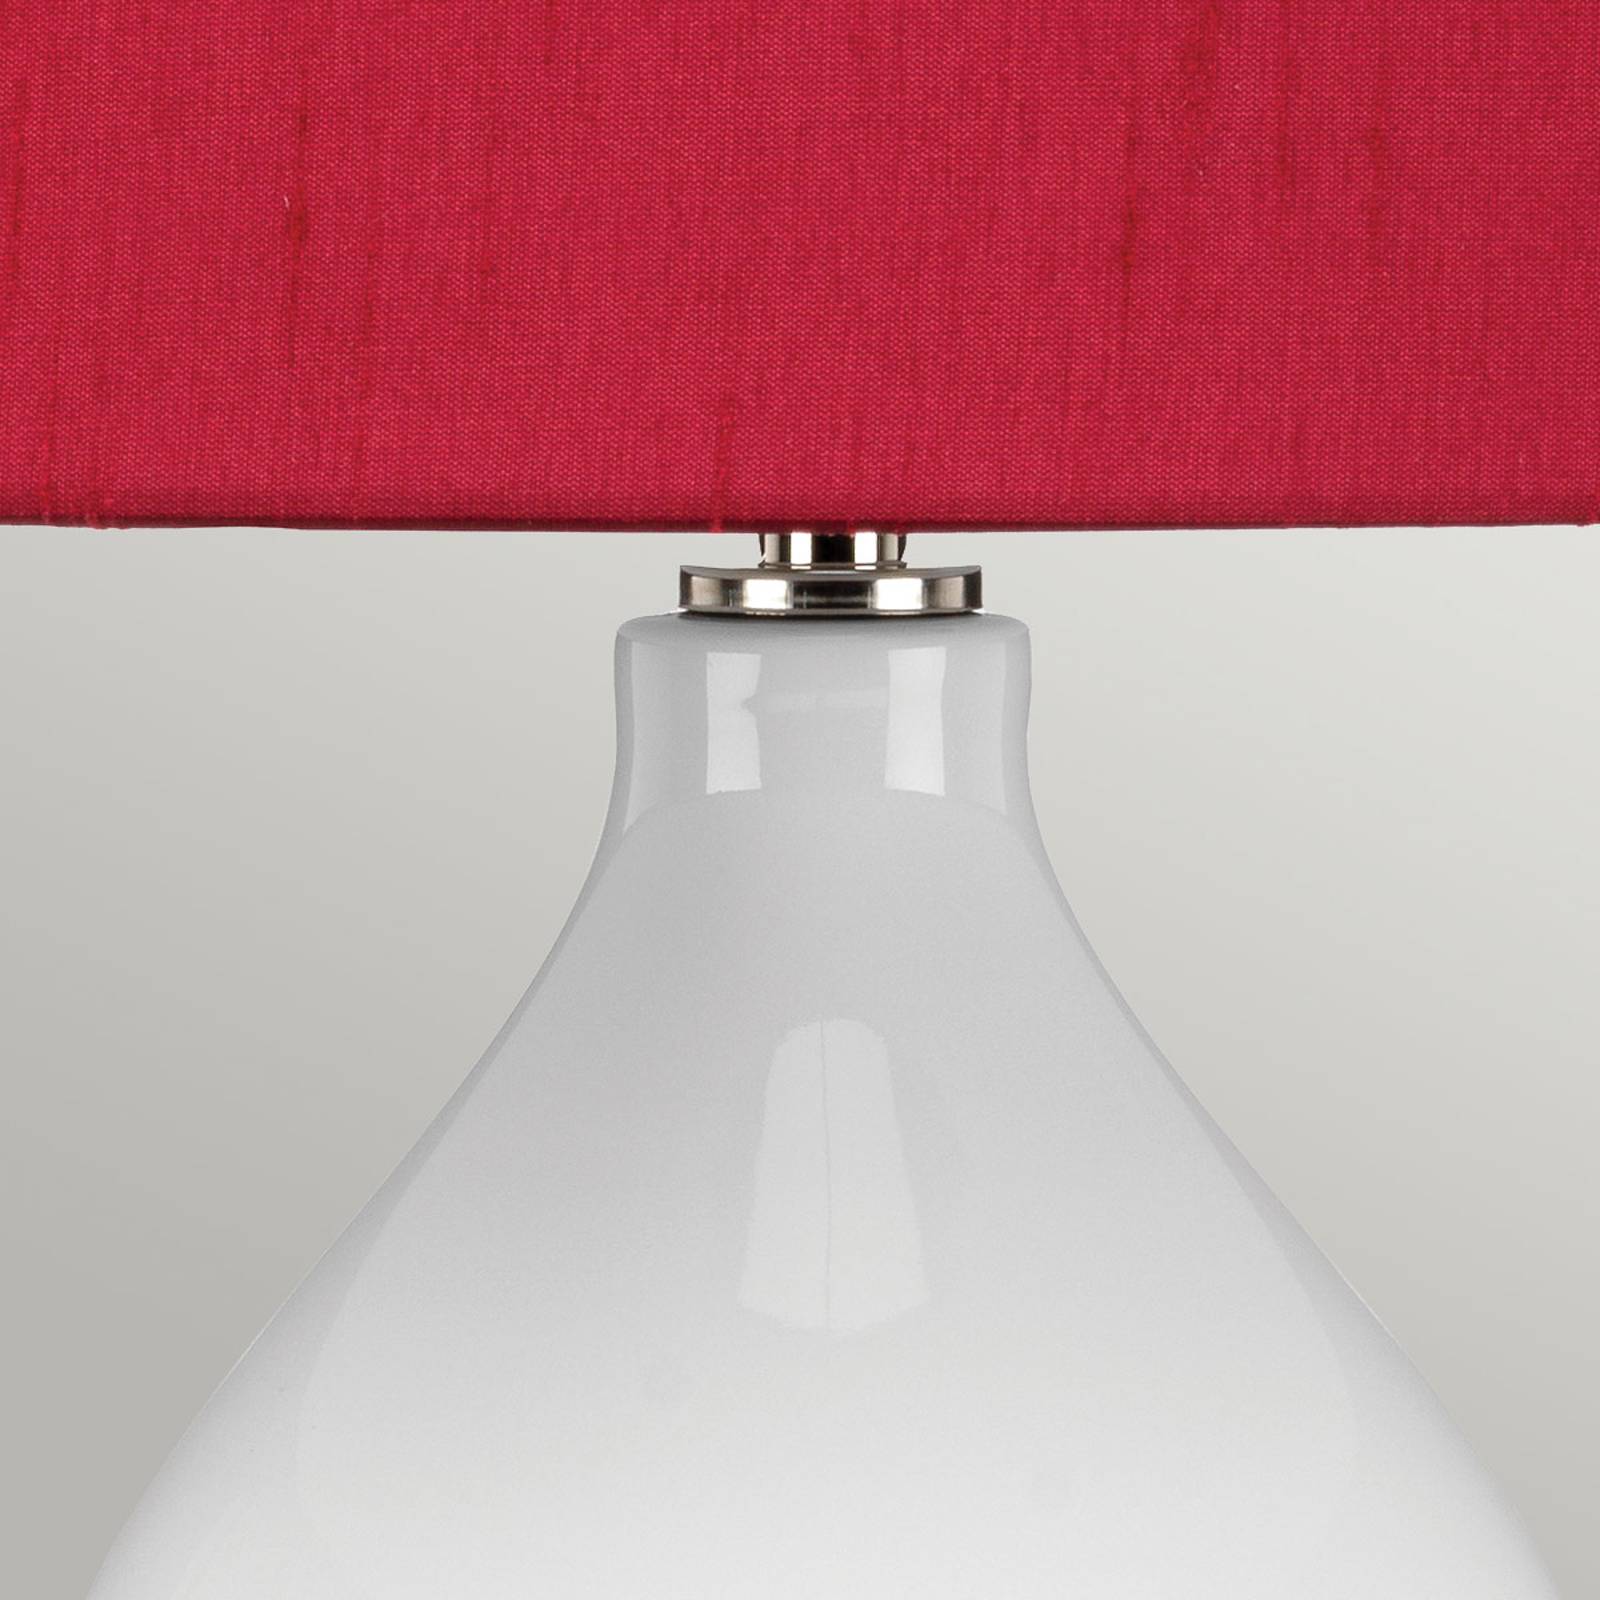 Photos - Desk Lamp Elstead Isla fabric table lamp polished nickel/red 